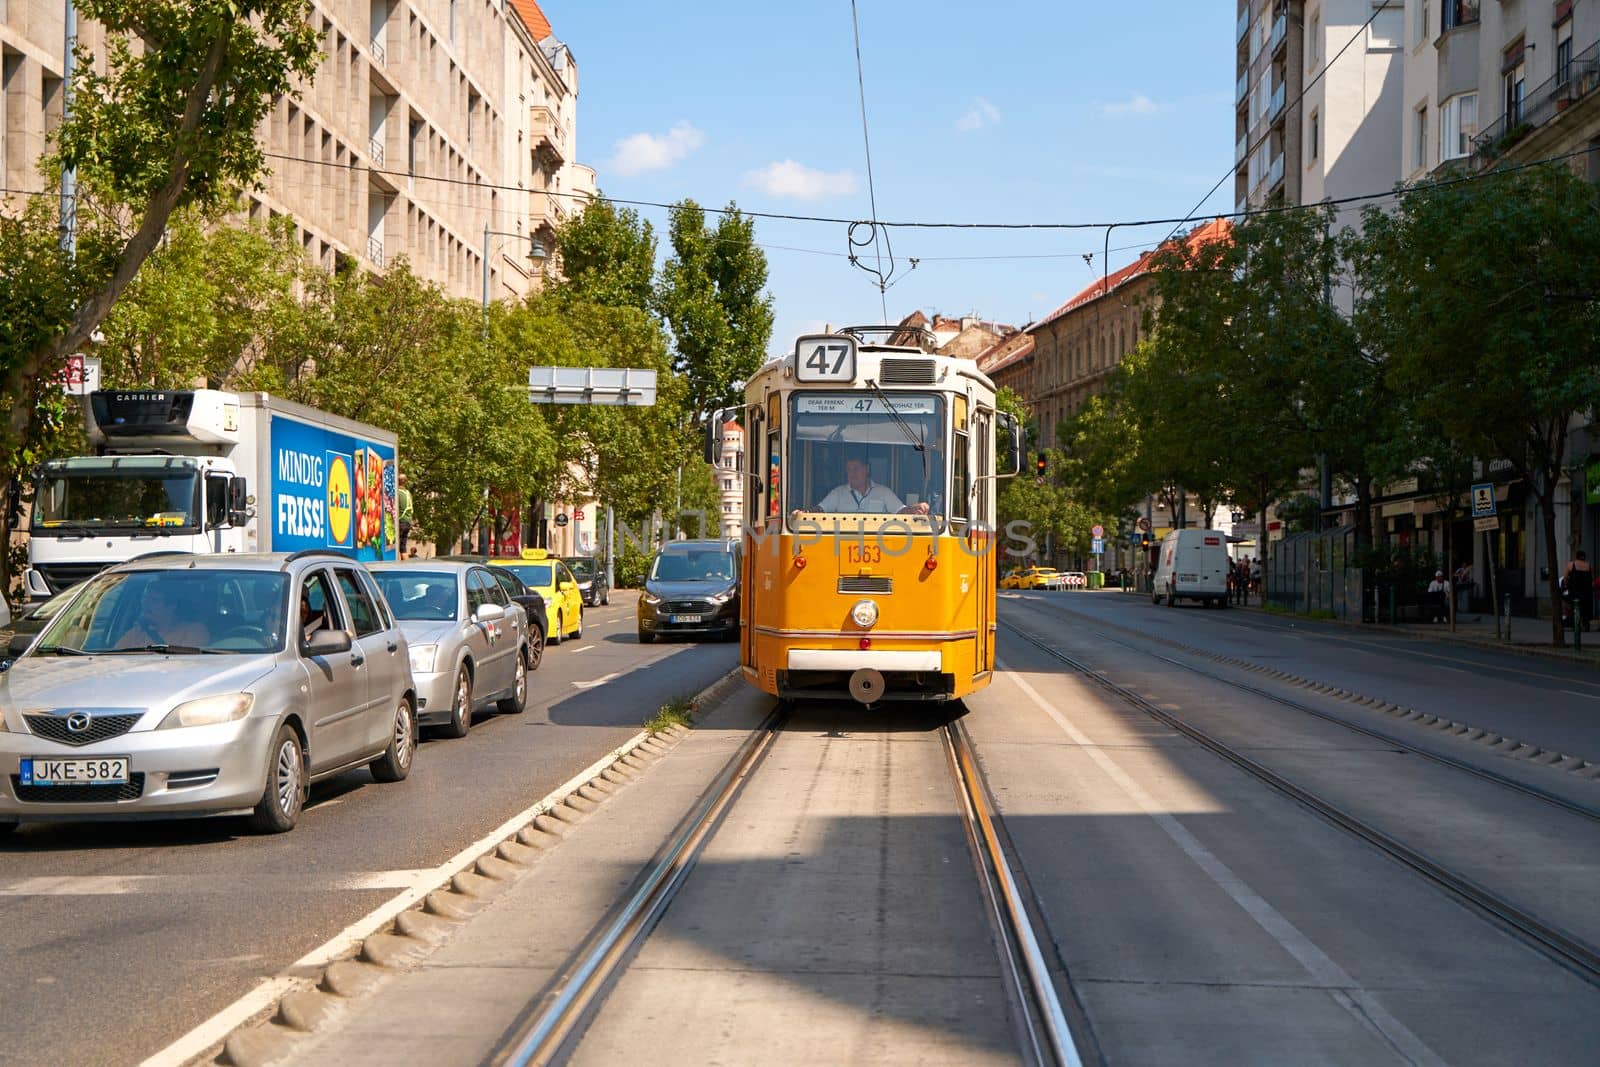 An old tram is traveling along a street in a modern city. Budapest, Hungary - 08.25.2022